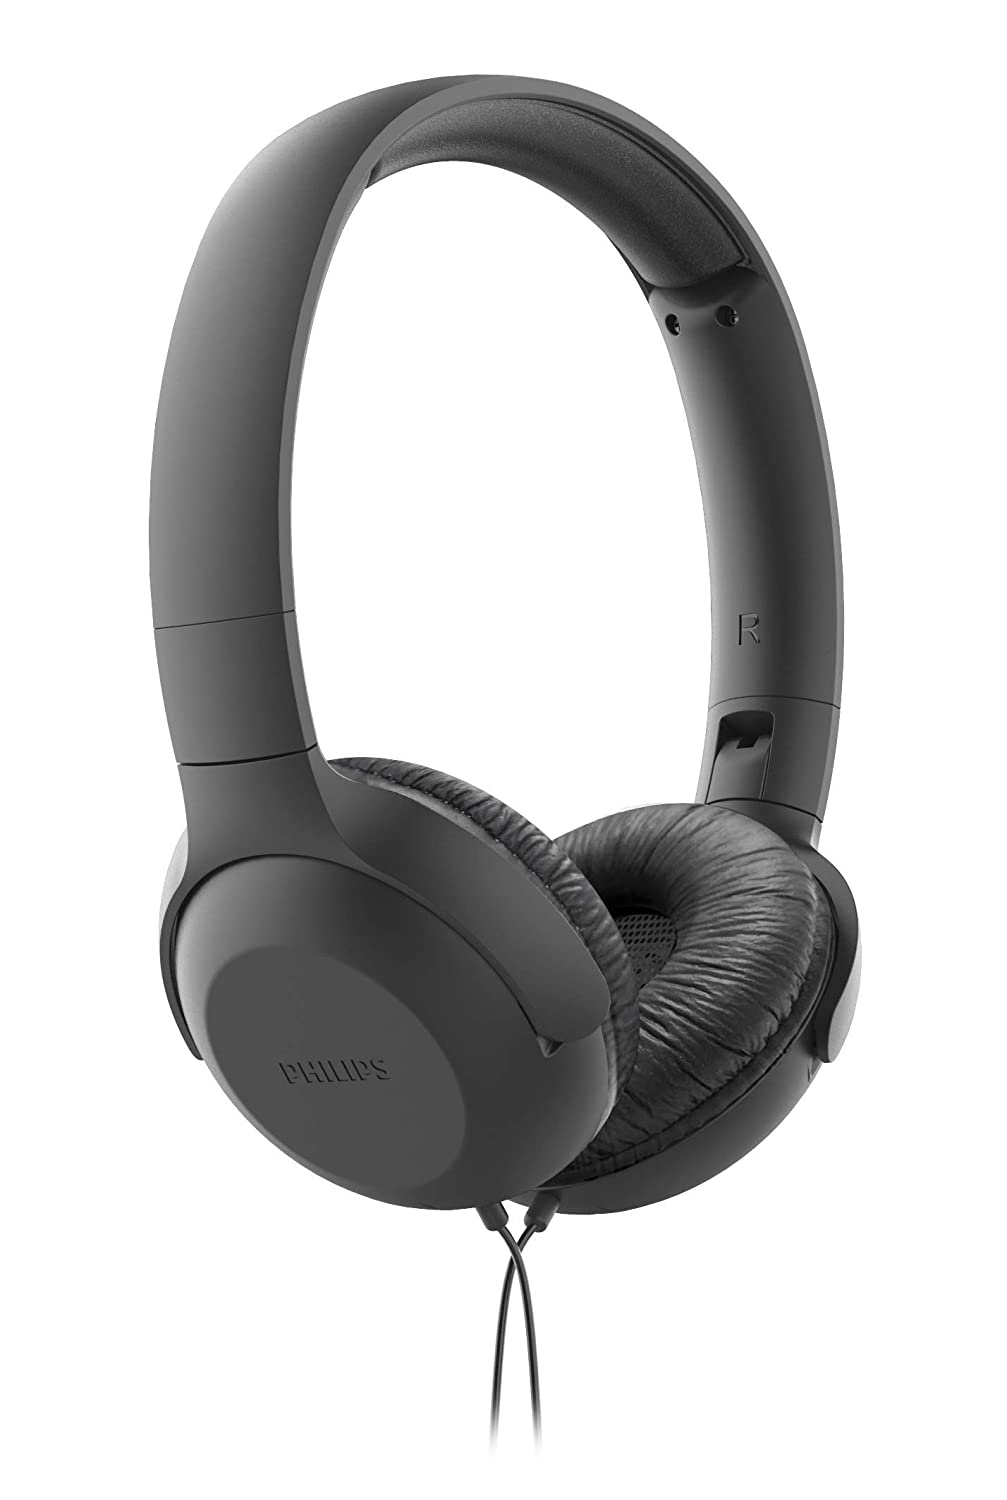 Philips UpBeat TAUH201BK On-Ear Headphones with 32 mm Drivers